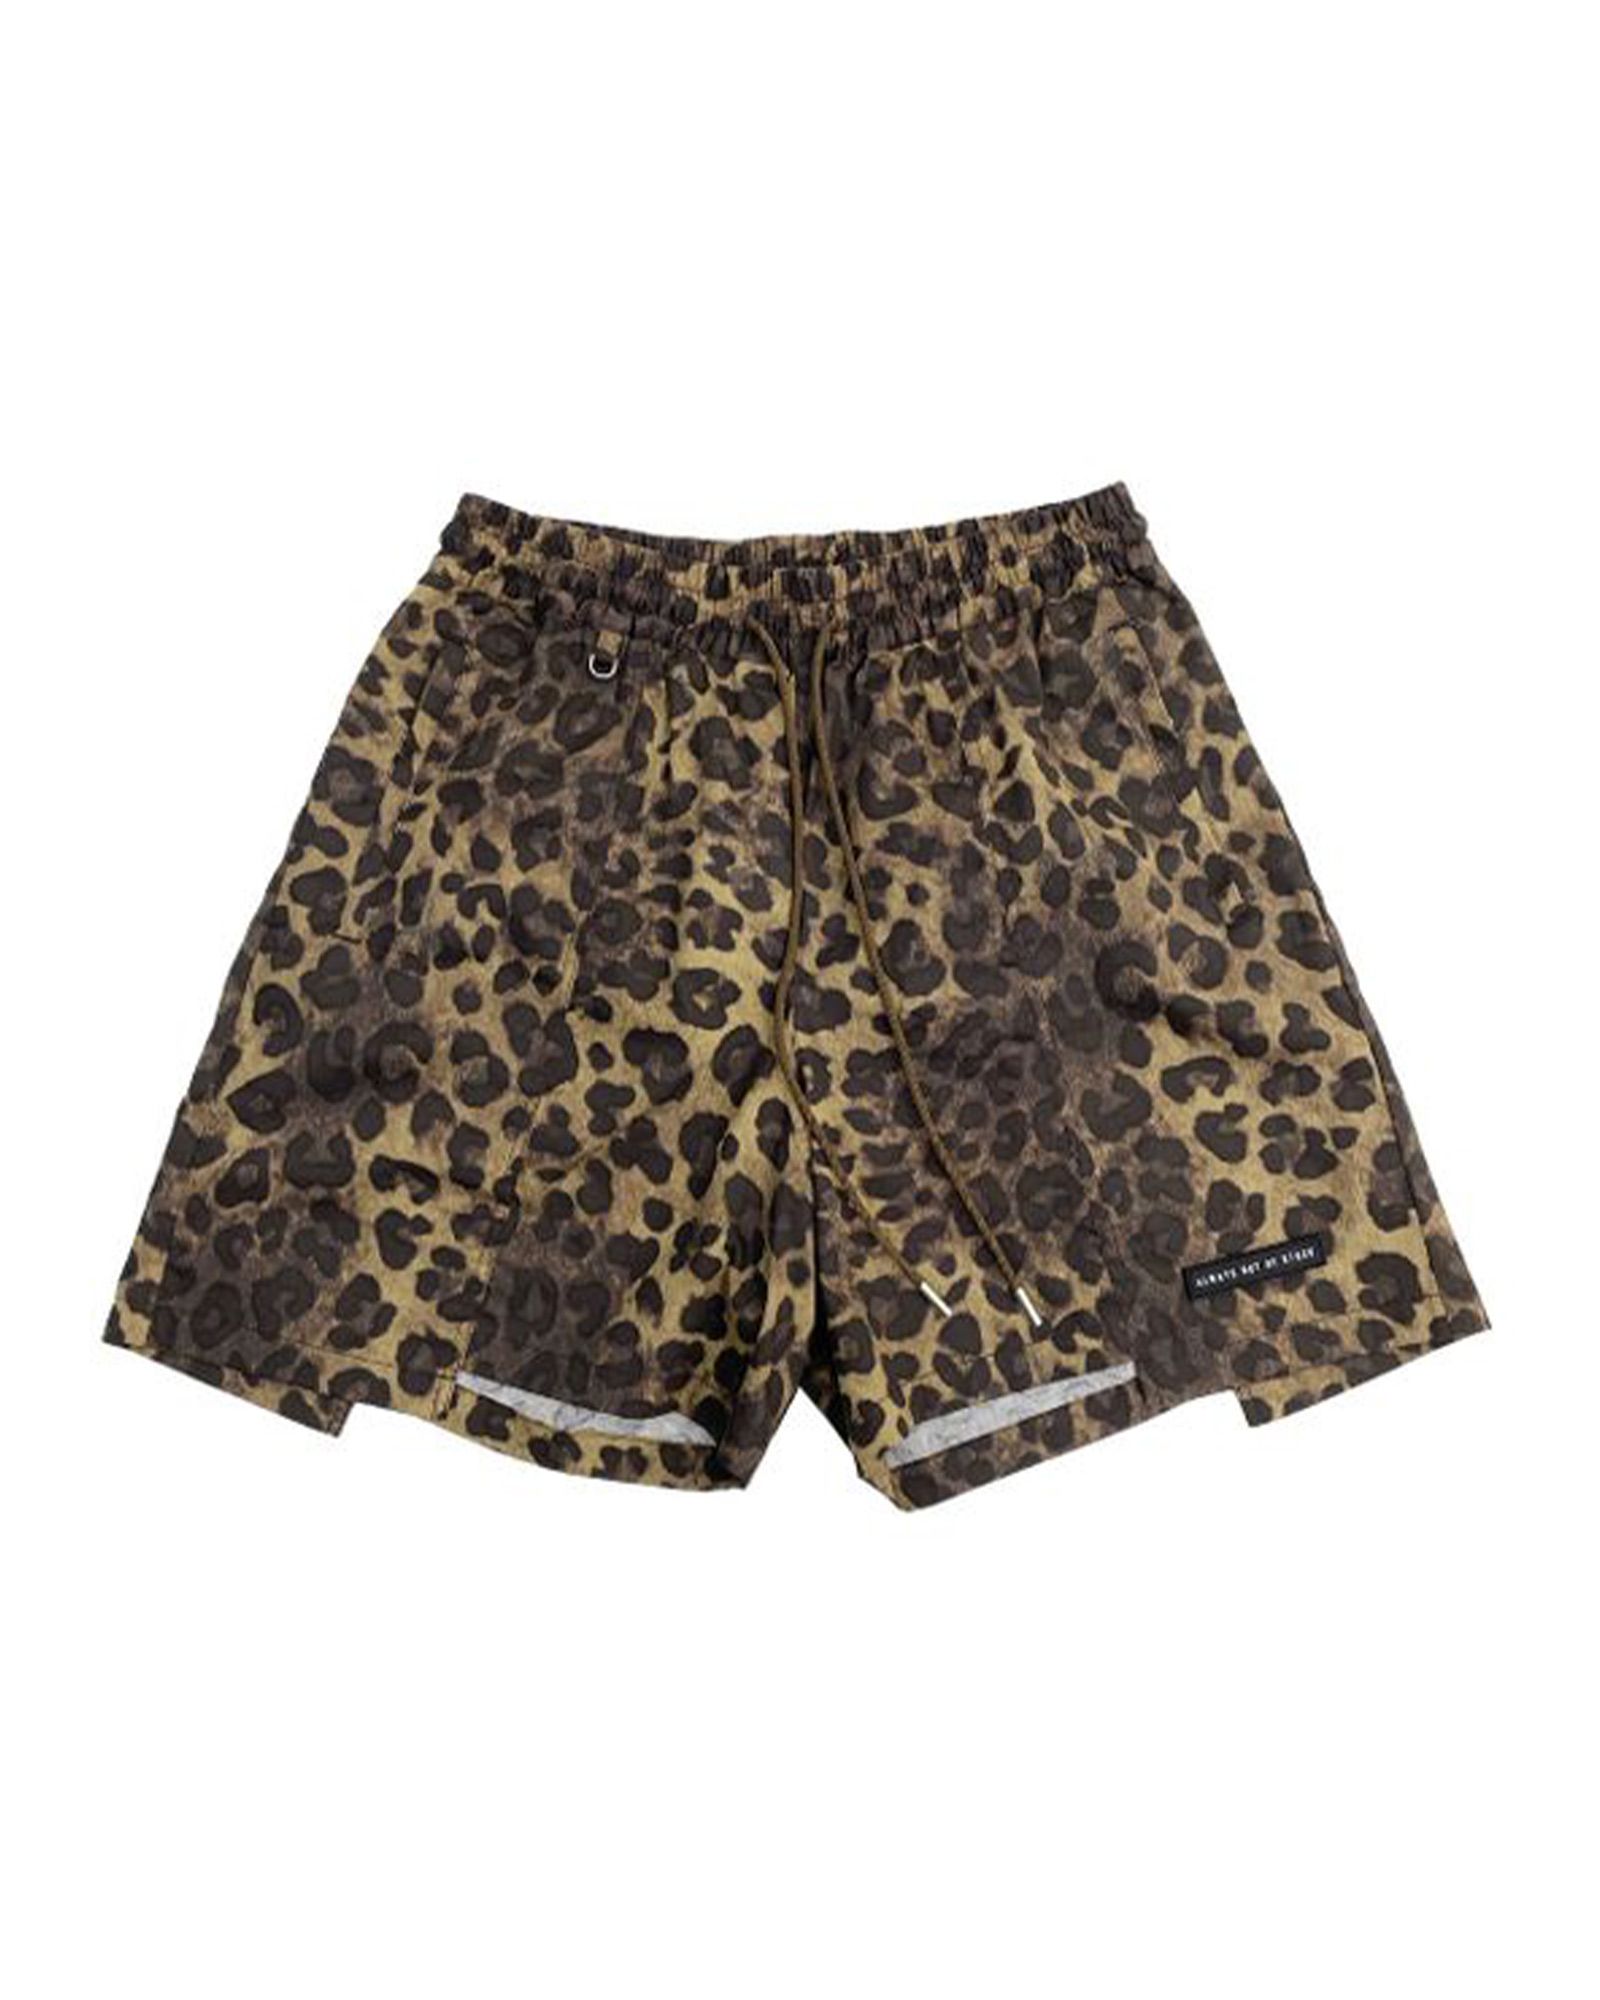 Alwaysoutofstock SWITCHED LEOPARD SHORTS - ショートパンツ